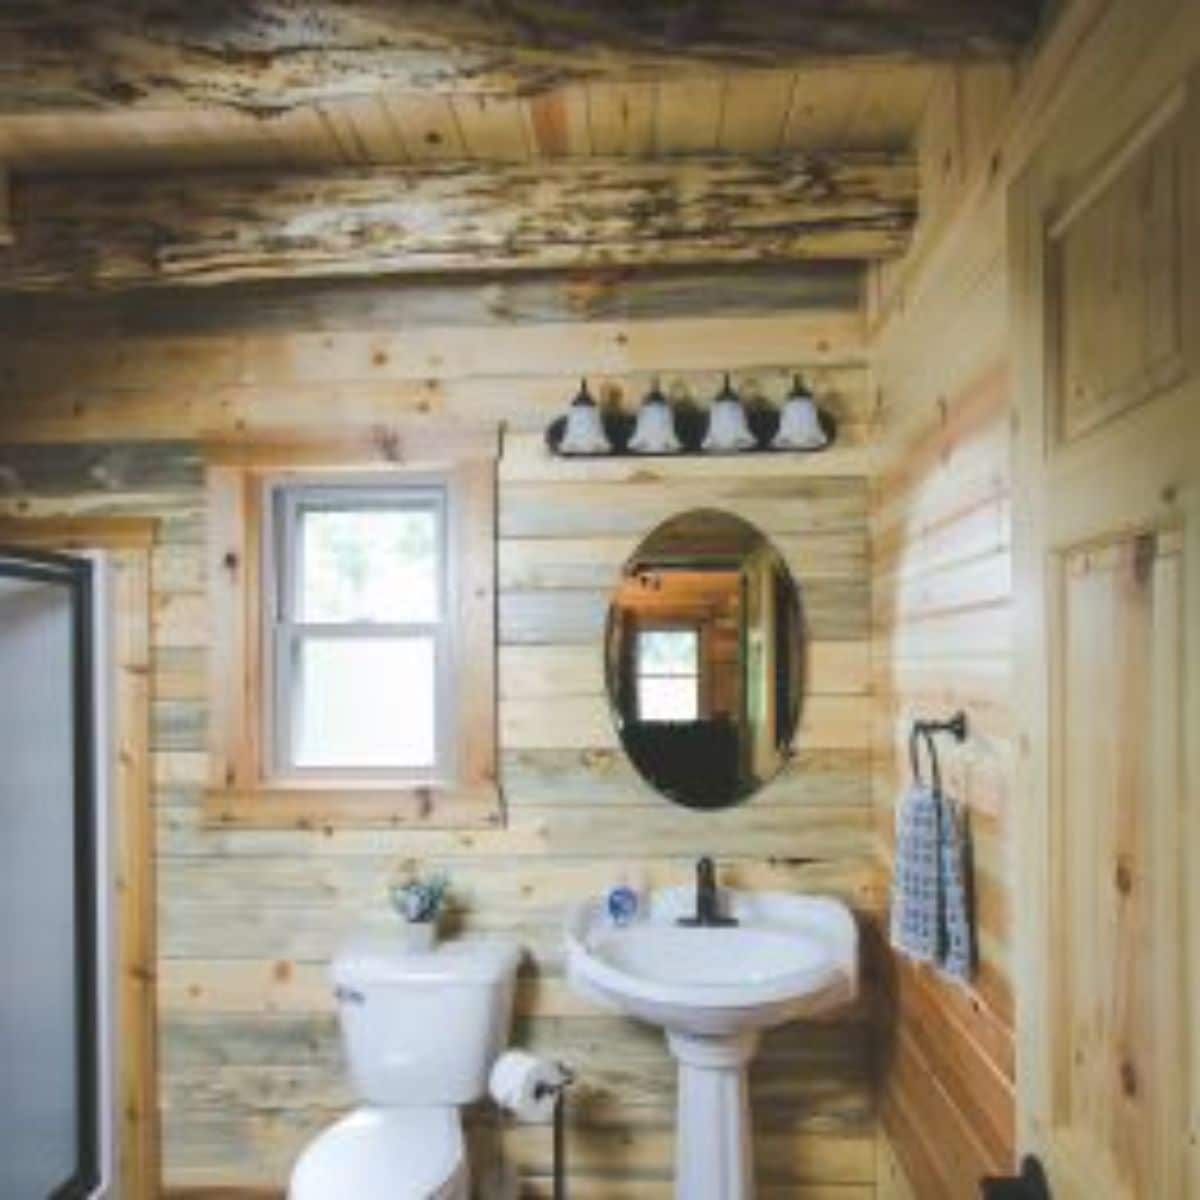 white toilet and sink against wall in log cabin